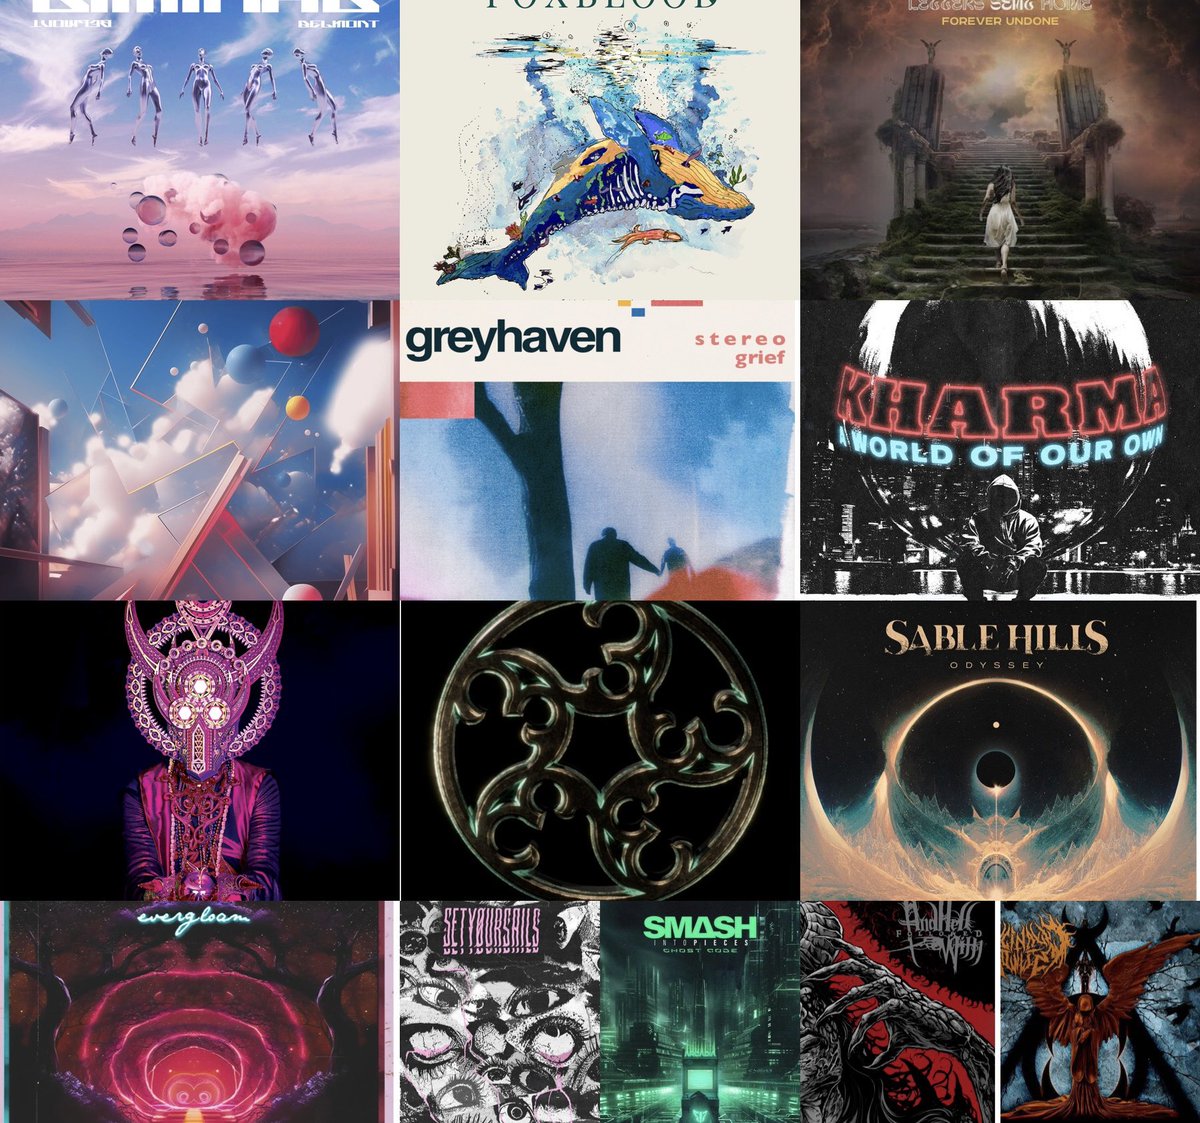 FRIDAY!

April madness continues!

New releases from these bands…

• Northlane
• Imminence
• Greyhaven
• Sable Hills
• Eidola
• Belmont
• Foxblood
• & Hell Followed With
• Kharma
• Letters Sent Home
• Evergloam
• Smash Hit Combo
• SETYØURSAILS
• Cincinnati Bowtie🤯